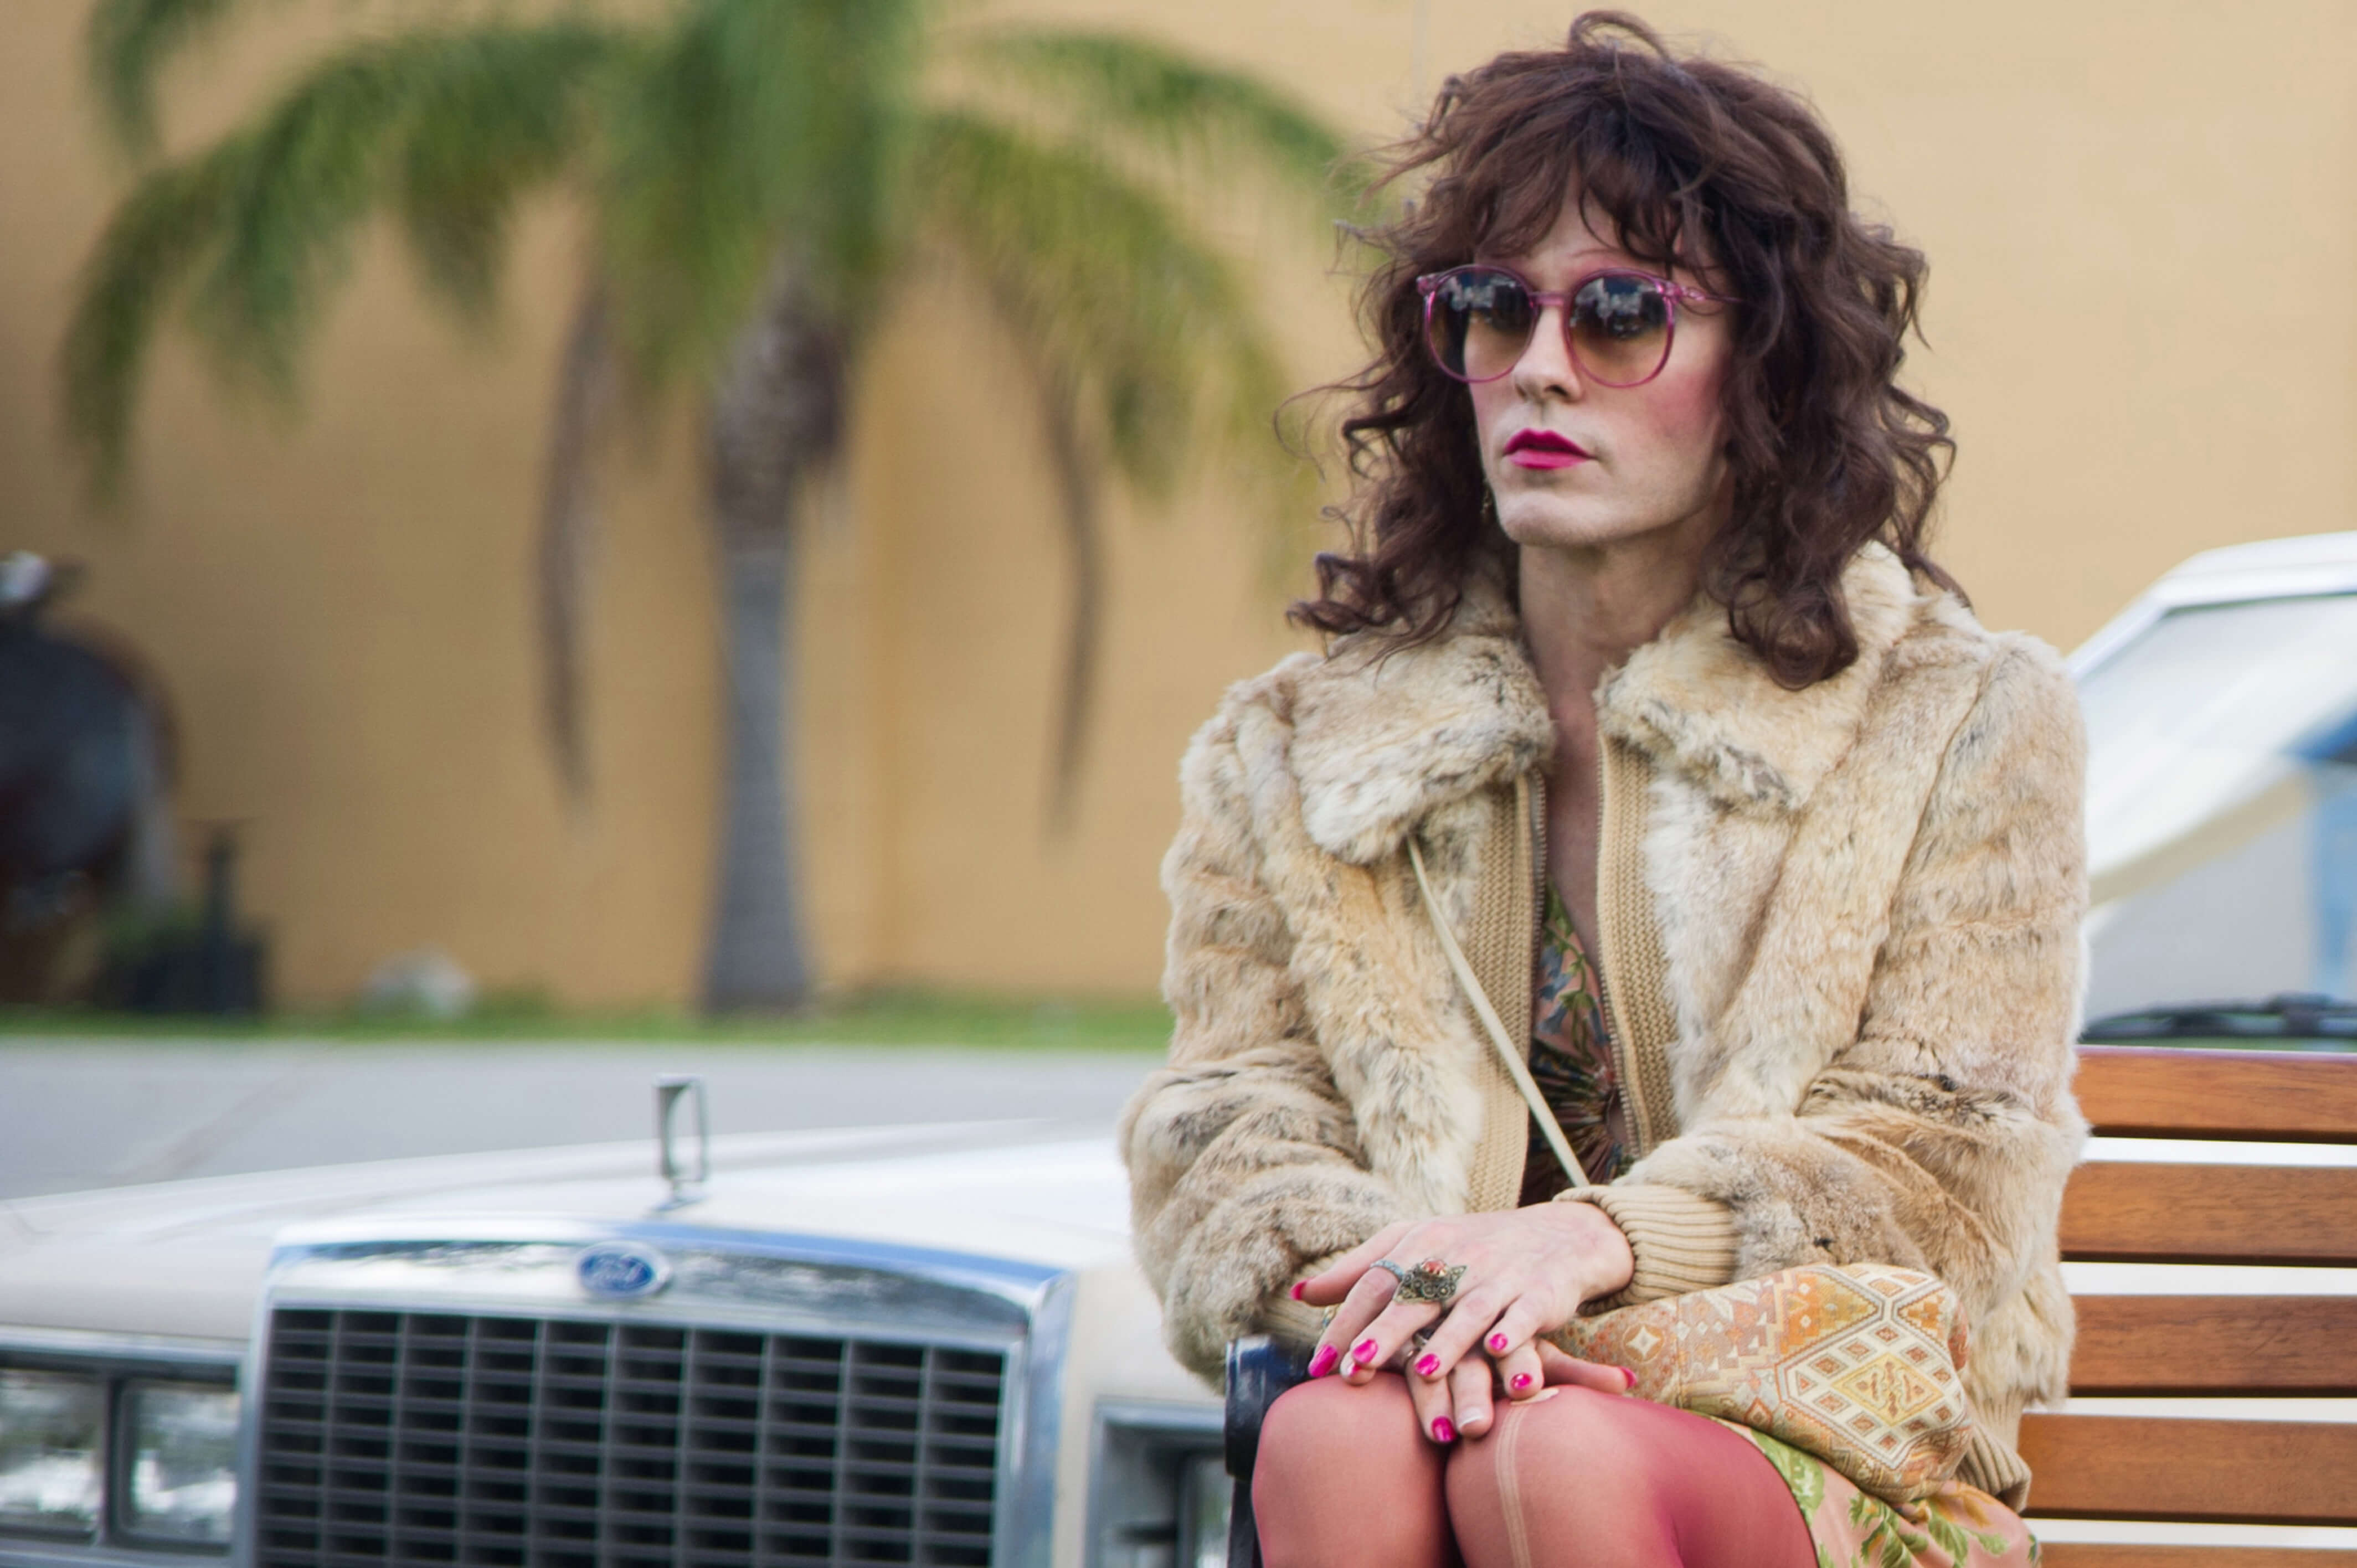 Jared Leto as Rayon in Jean-Marc Vallée’s fact-based drama, DALLAS BUYERS CLUB, a Focus Features release. Photo Credit: Anne Marie Fox / Focus Features